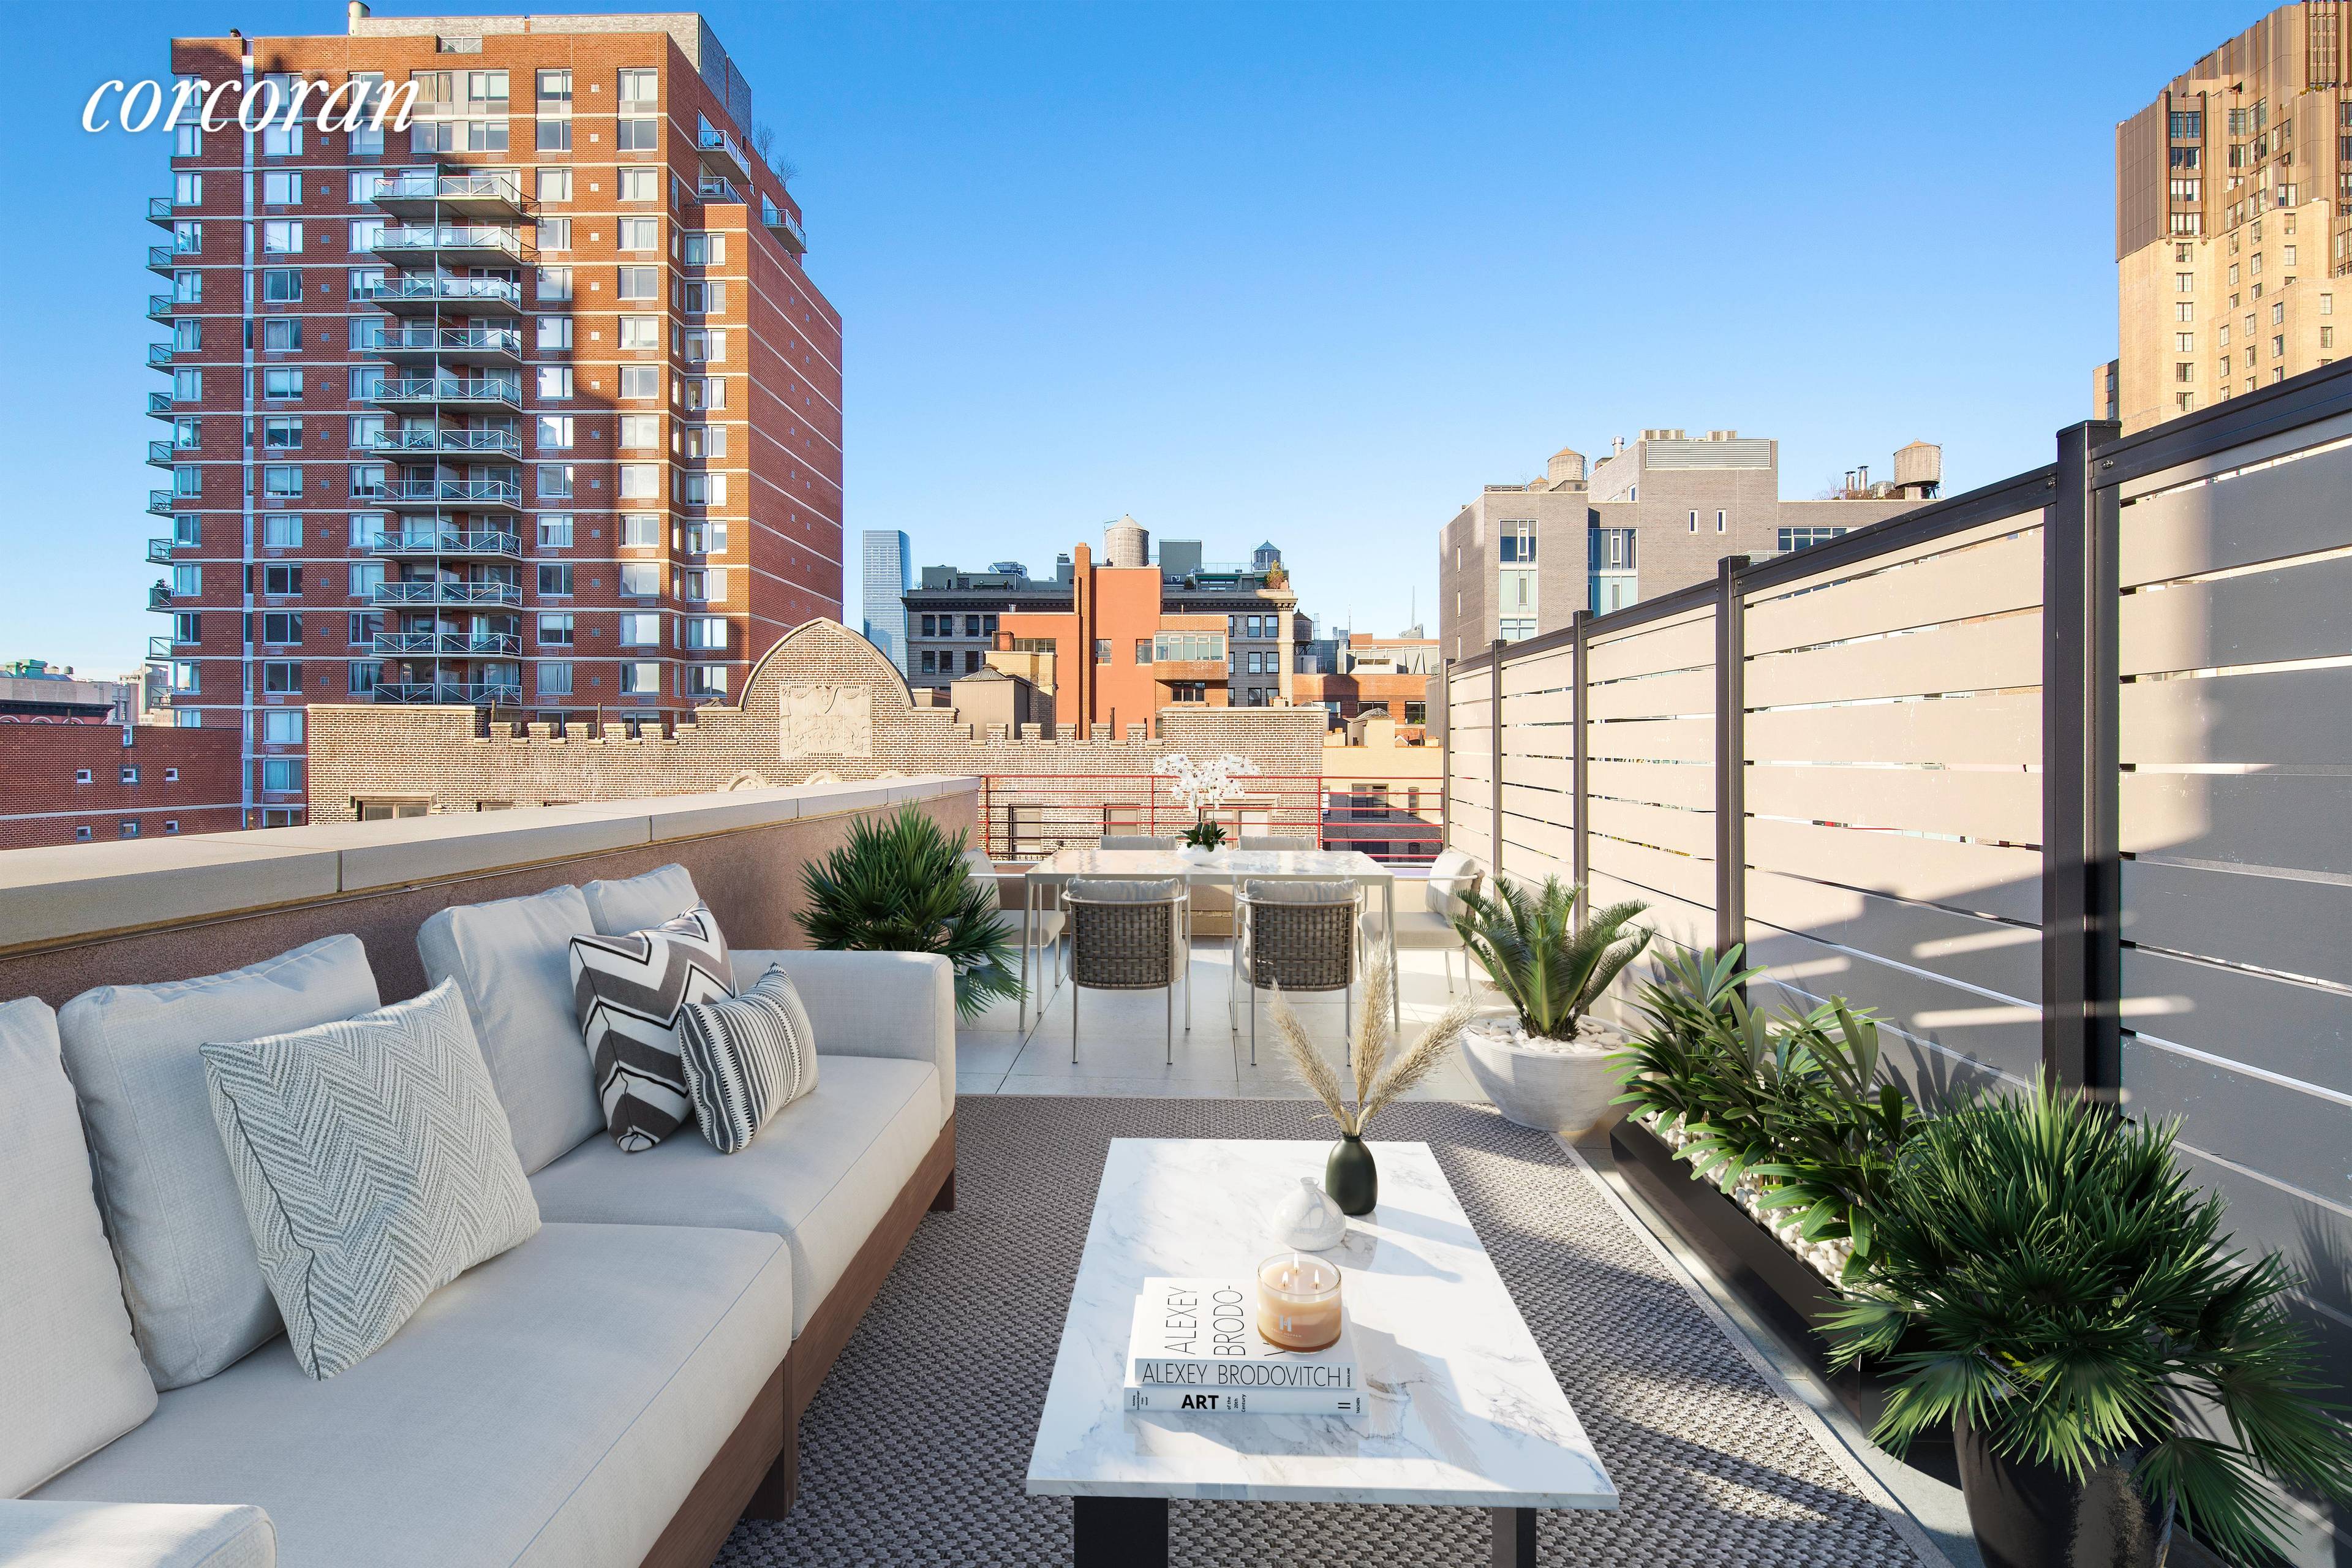 Full Floor Lofts for Indoor and Outdoor Living 246 West 16th Street is an exclusive collection of four thoughtfully designed full floor condominium residences with outdoor spaces, located on a ...